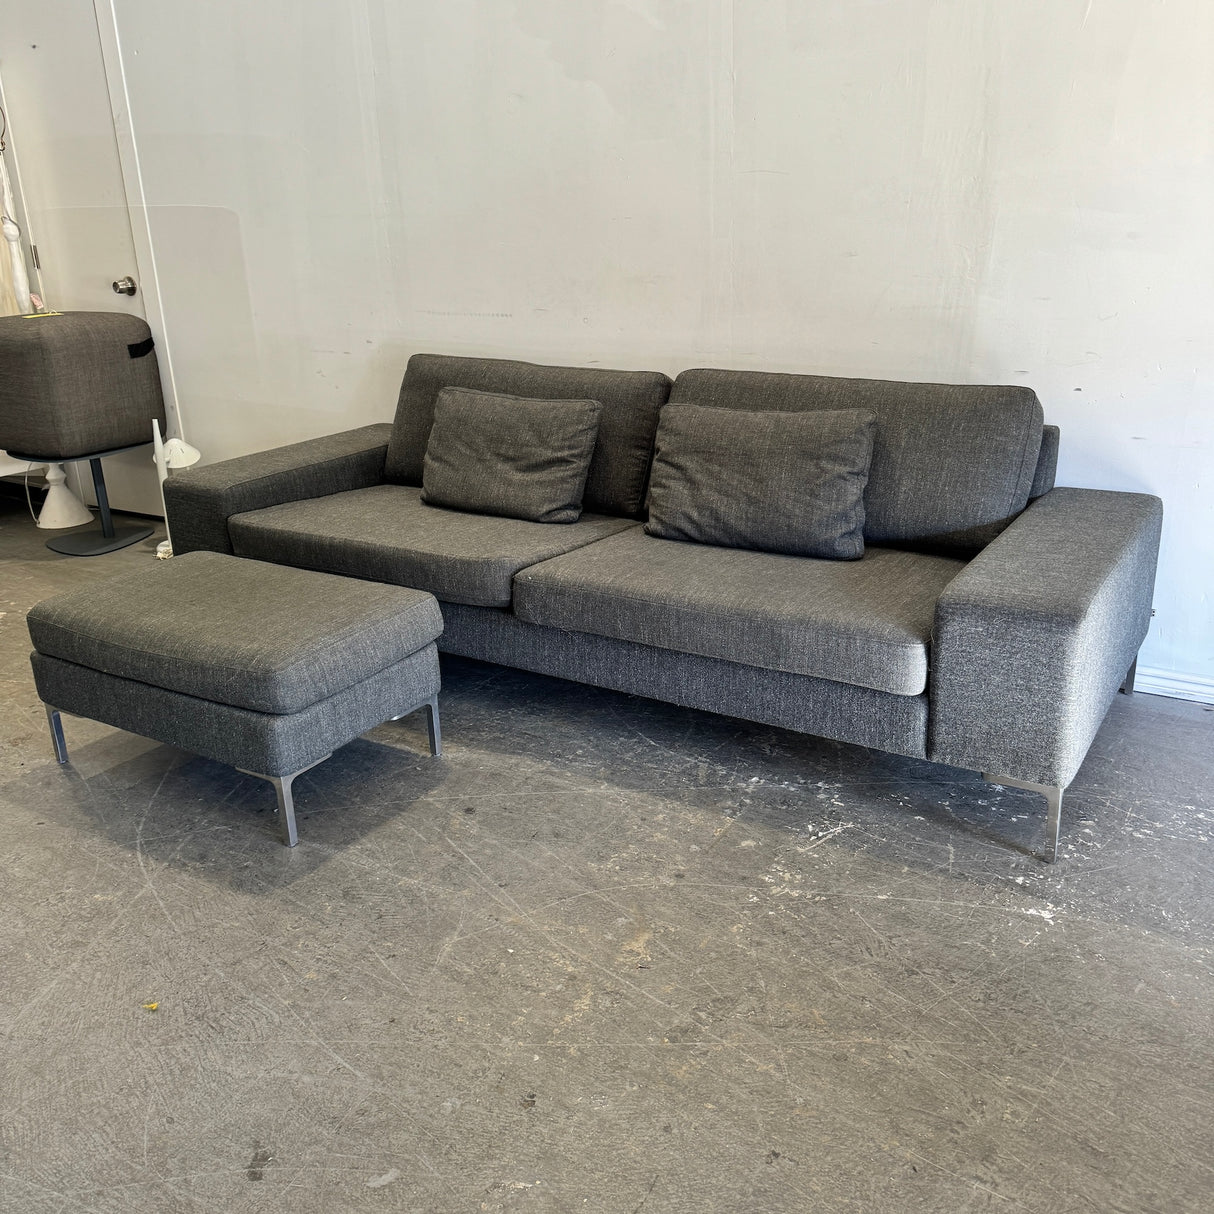 Design Within Reach Arena sectional sofa with ottoman